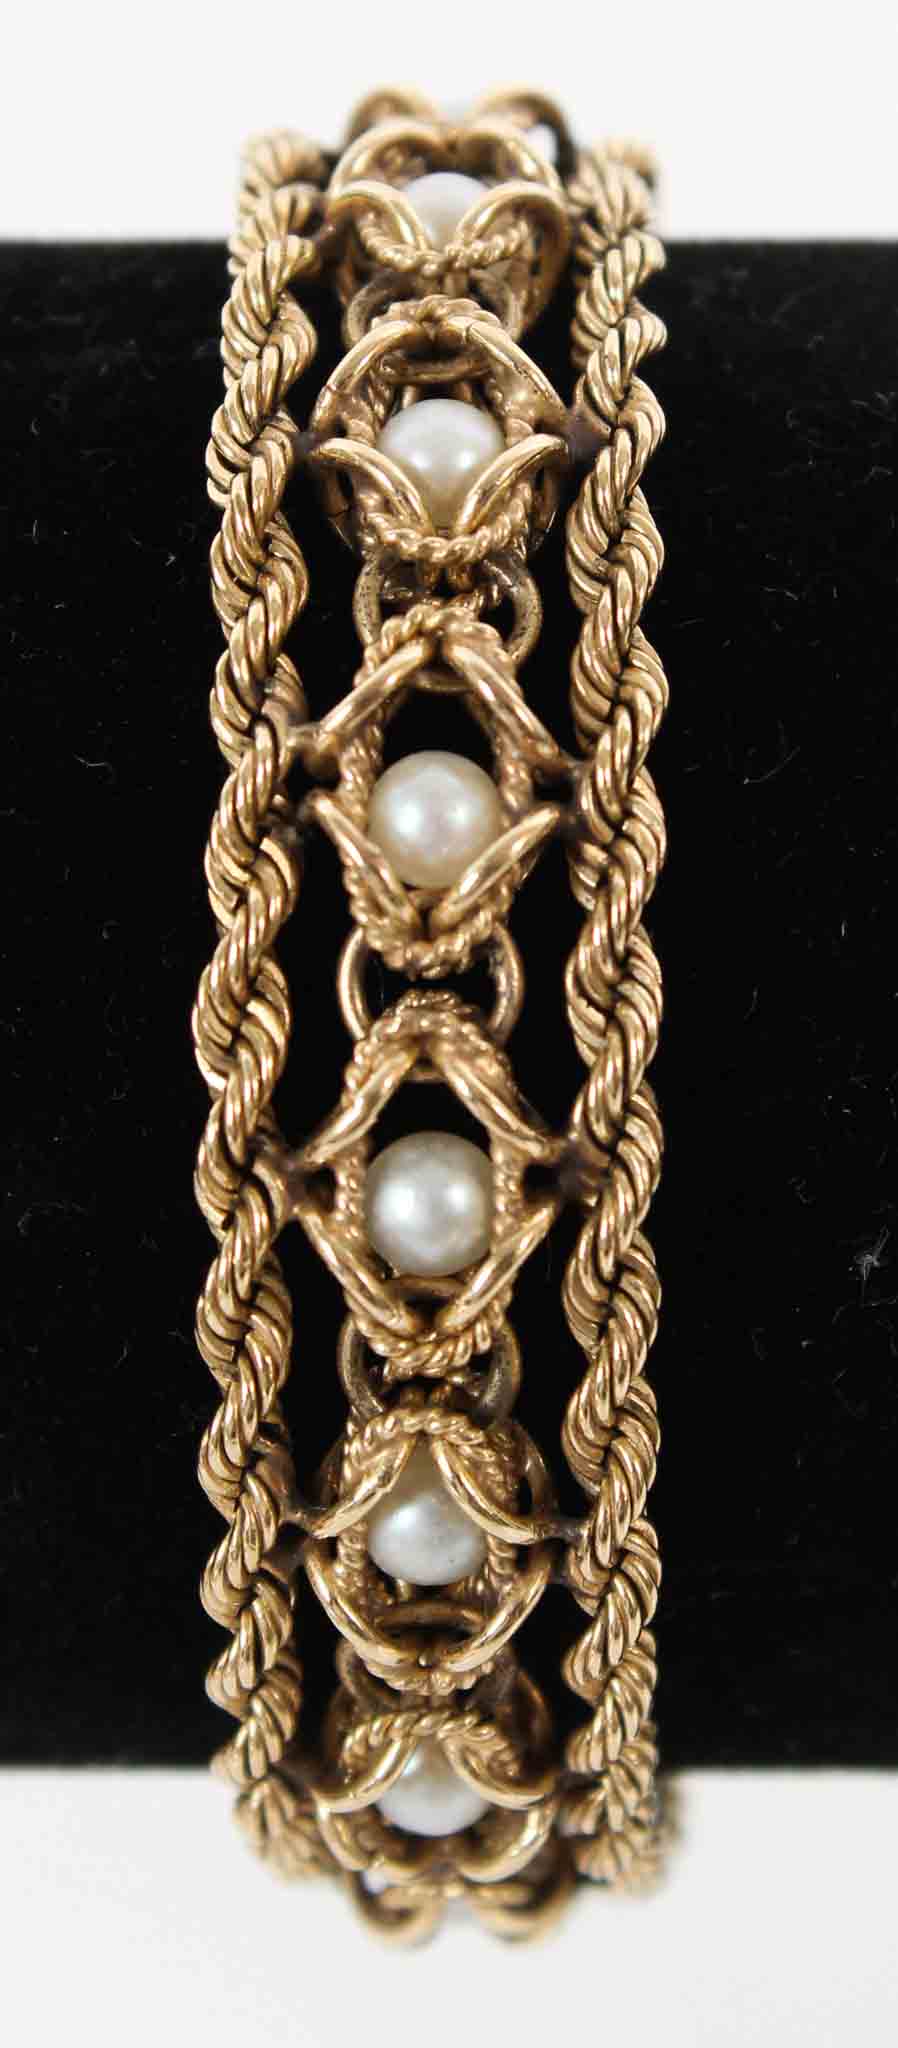 14K Yellow Gold Rope Chain Bracelet with Pearls